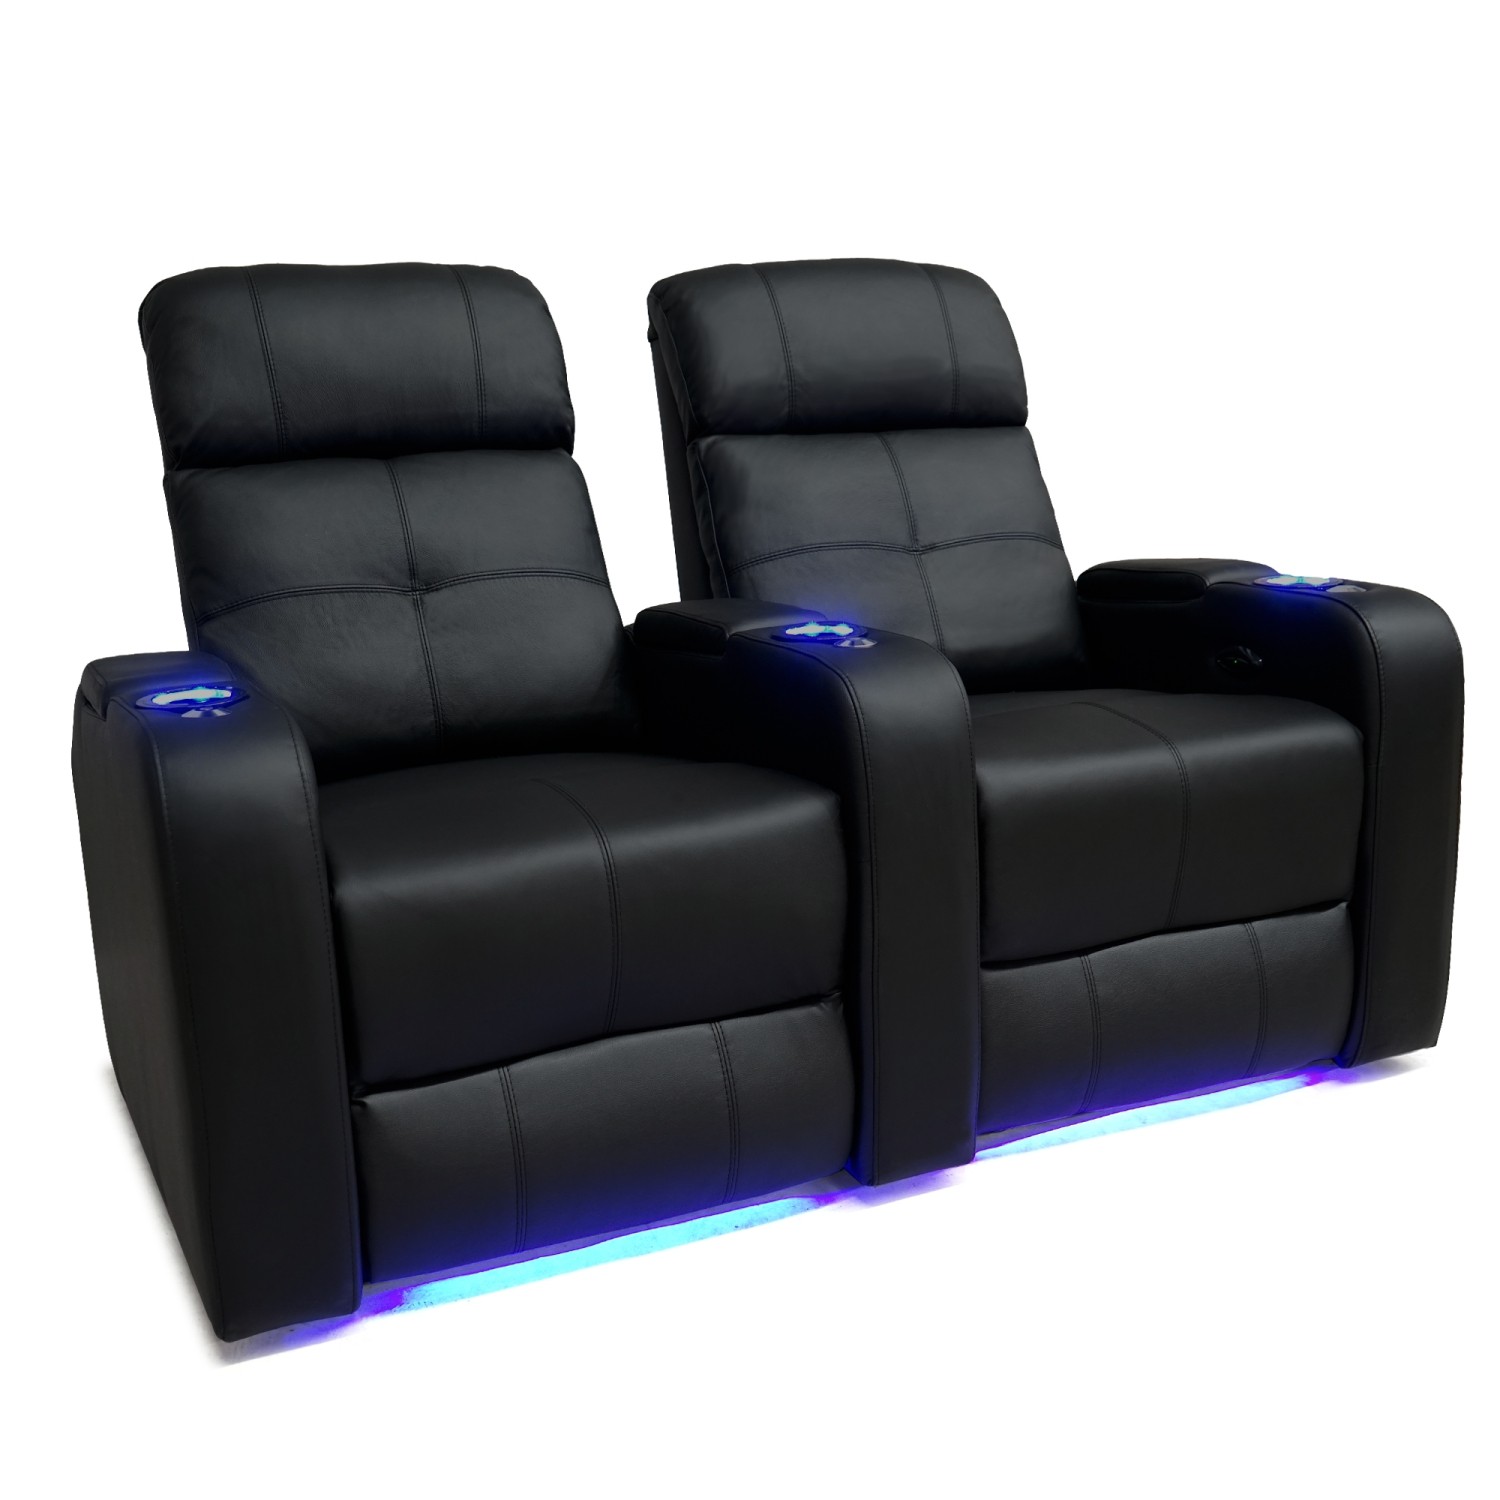 Valencia Verona Motorized Home Theater Seating - Top Grain Leather